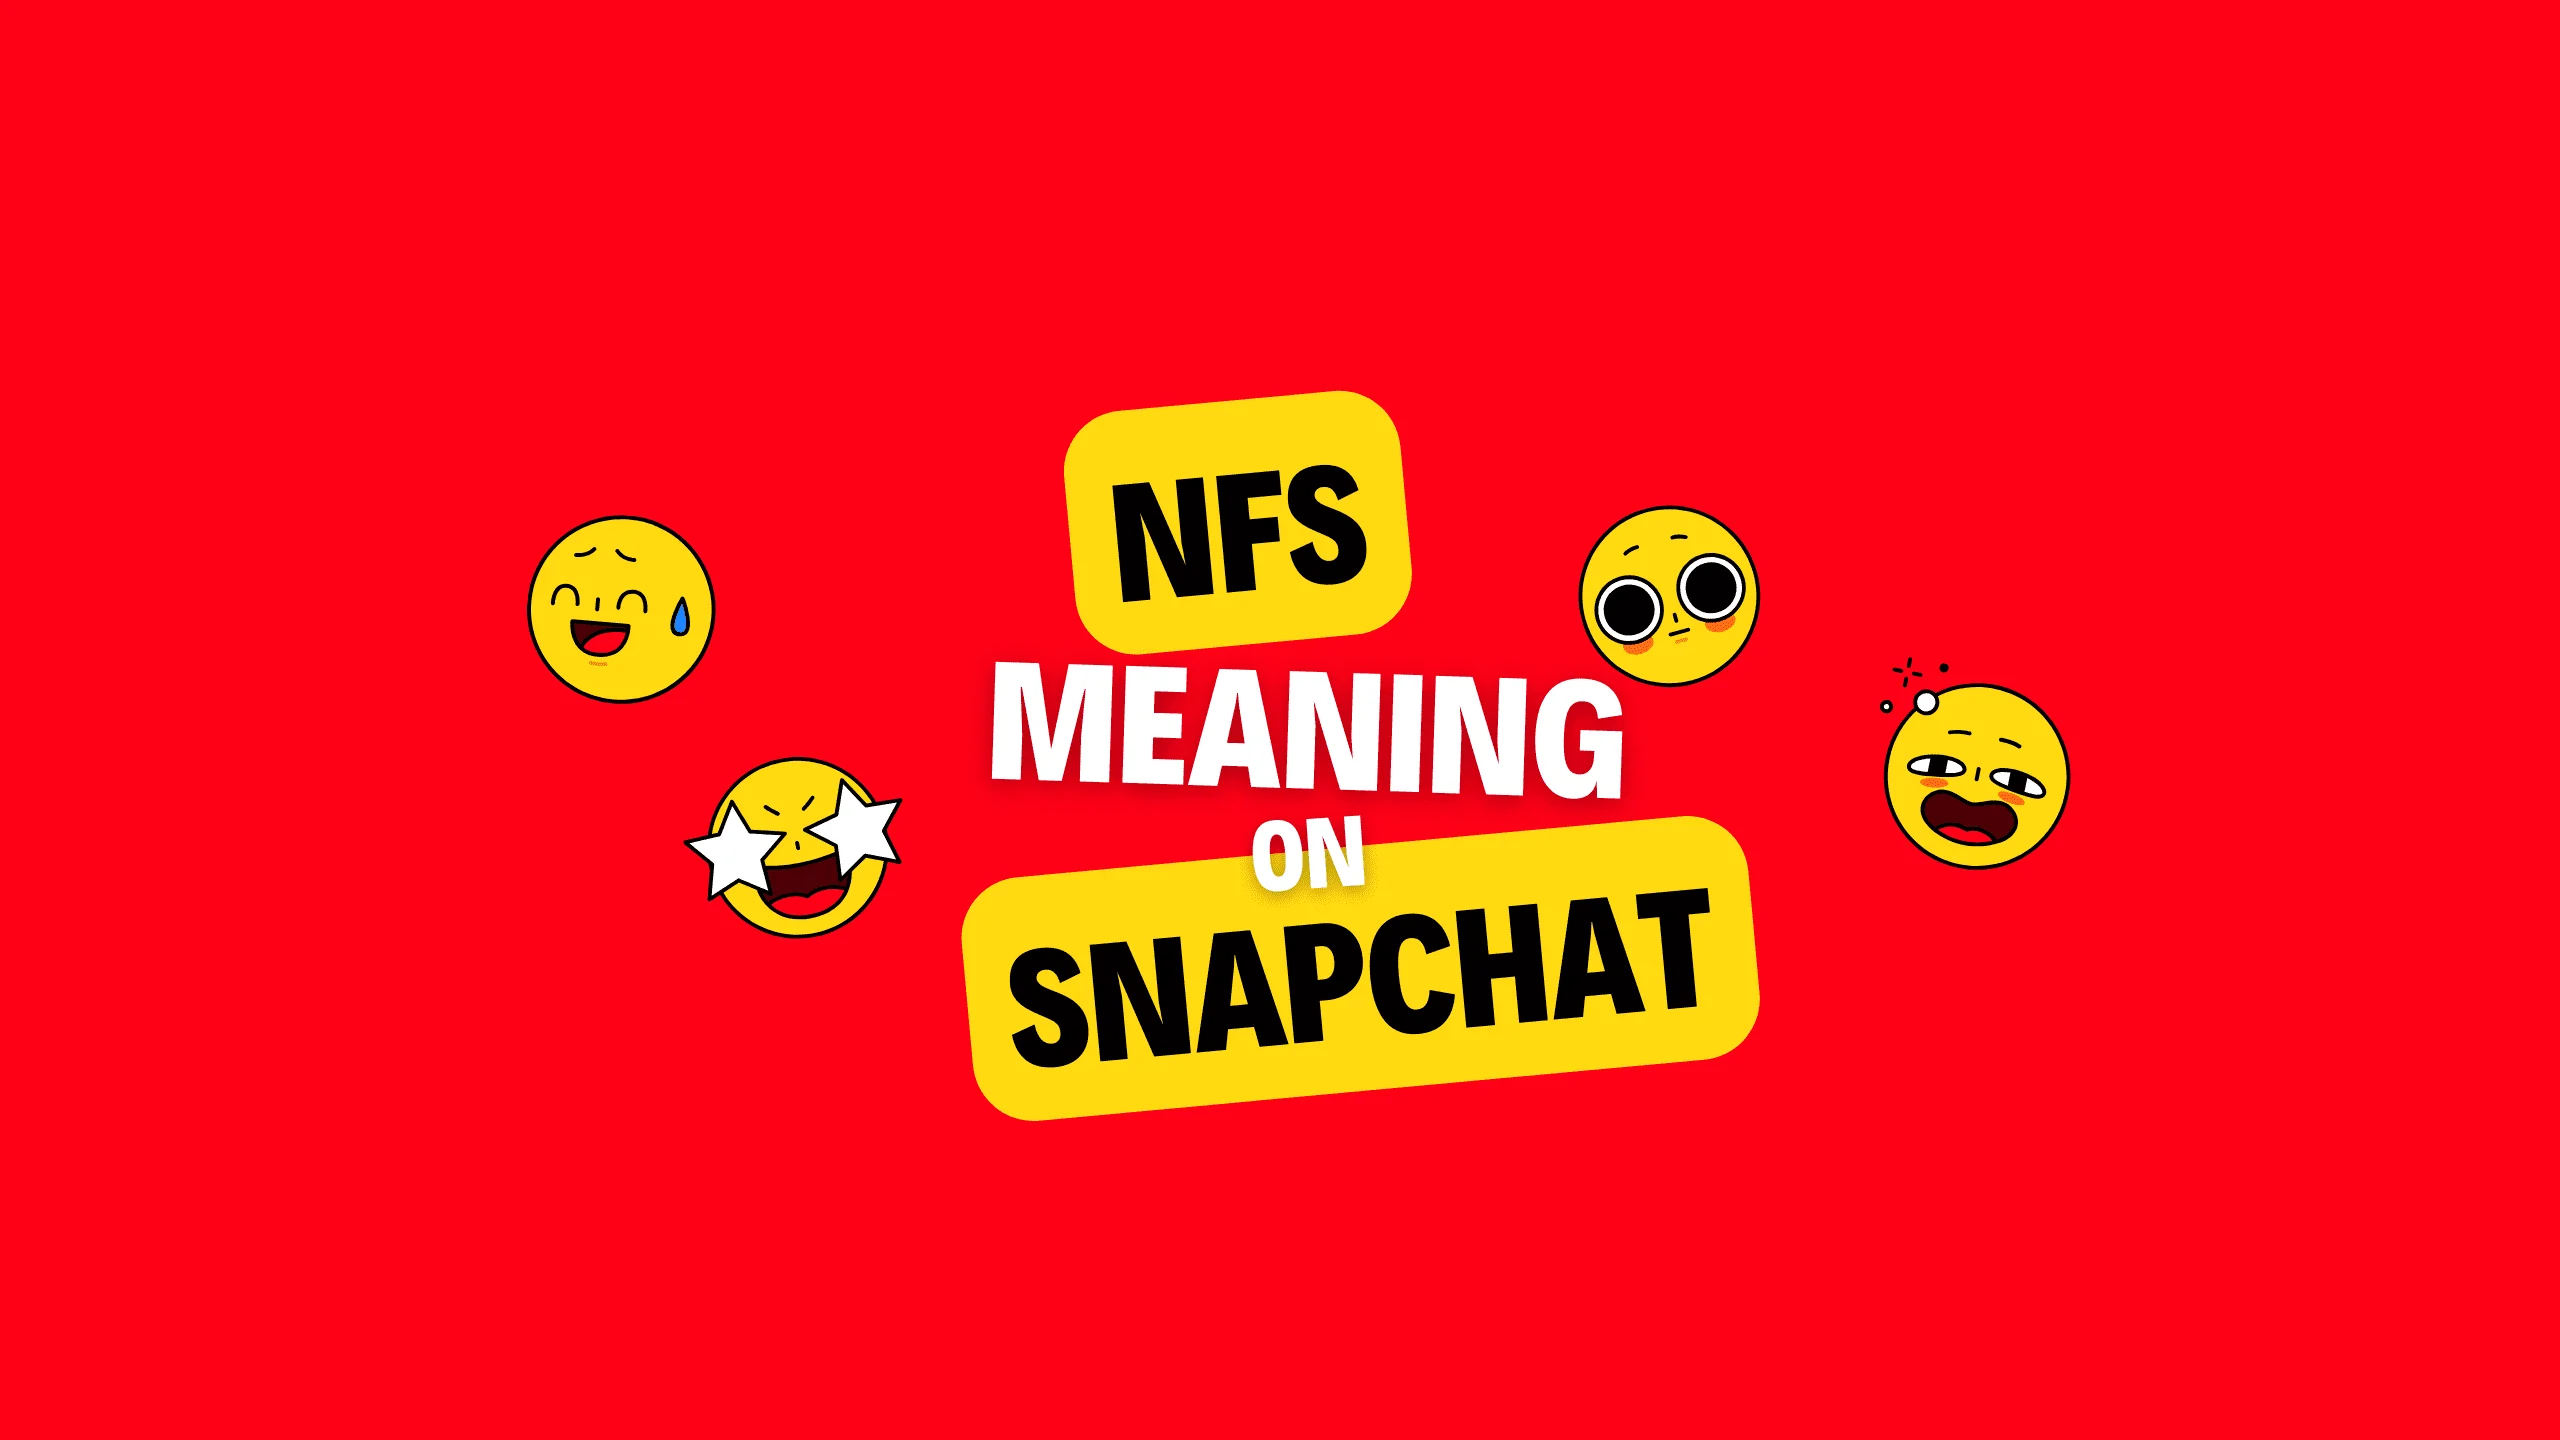 What does NFS mean on Snapchat